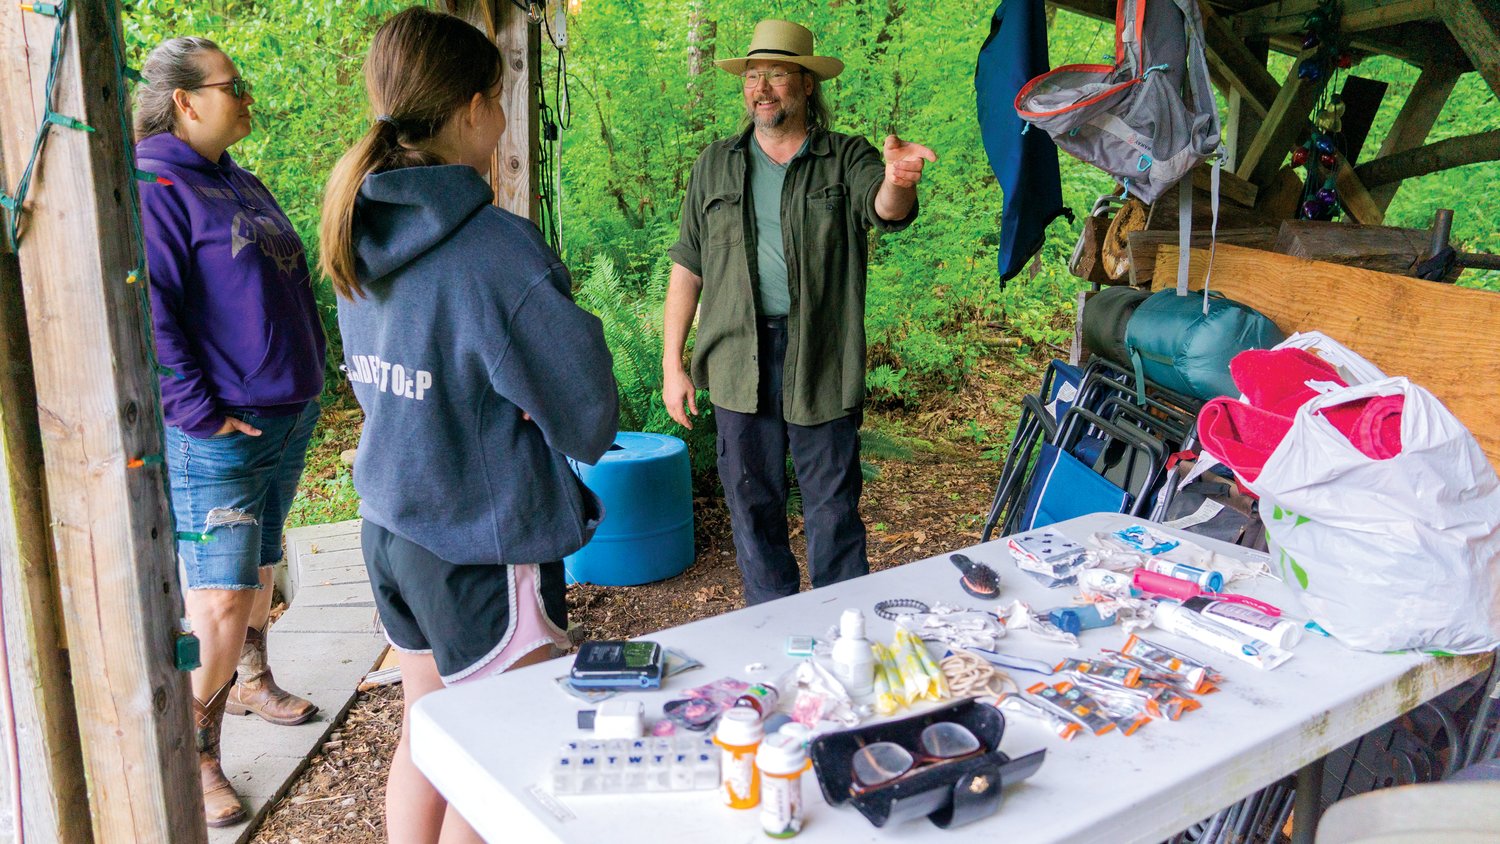 Chronicle reporter Isabel Vander Stoep speaks with Heather and Gryphon MacForrest after they returned the contents of a lost kayak. Some of the items recovered from the kayak on the Chehalis River are pictured on the table next to them.